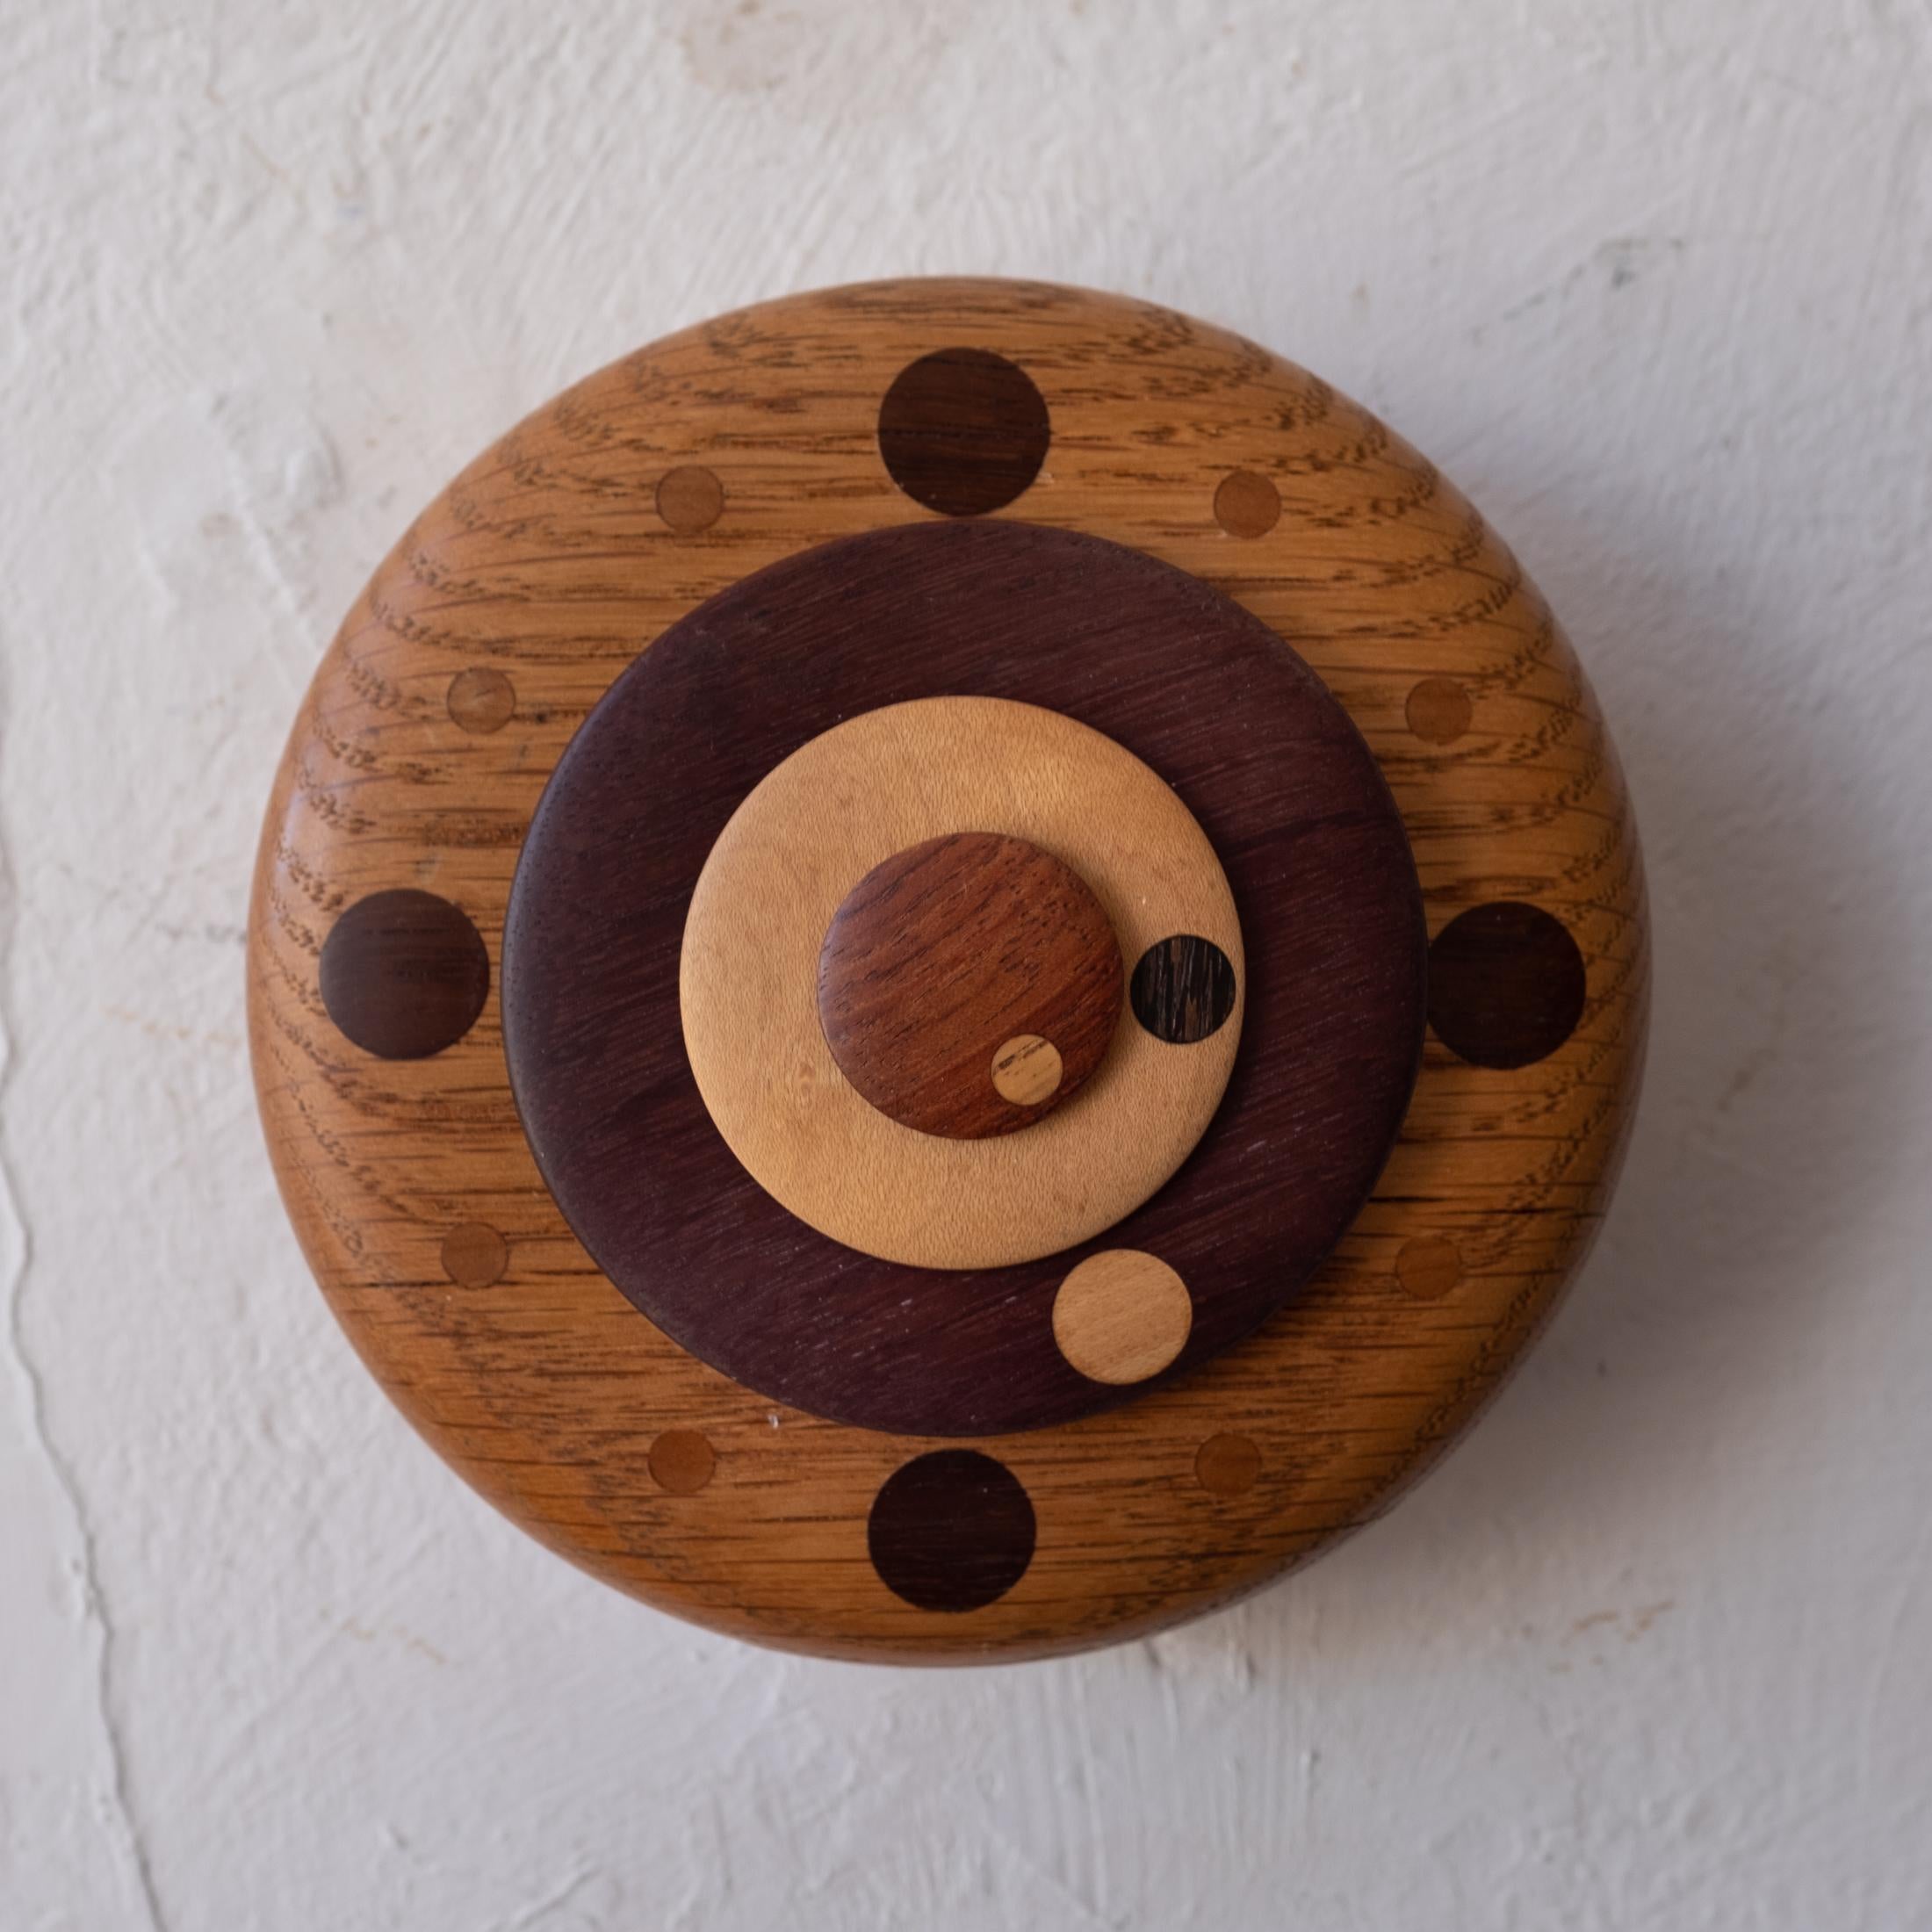 Amazing artist made wood clock. Has hour, minutes and seconds. Incredible craftsmanship with mixed woods. Signed on the back. New movement that keeps perfect time.